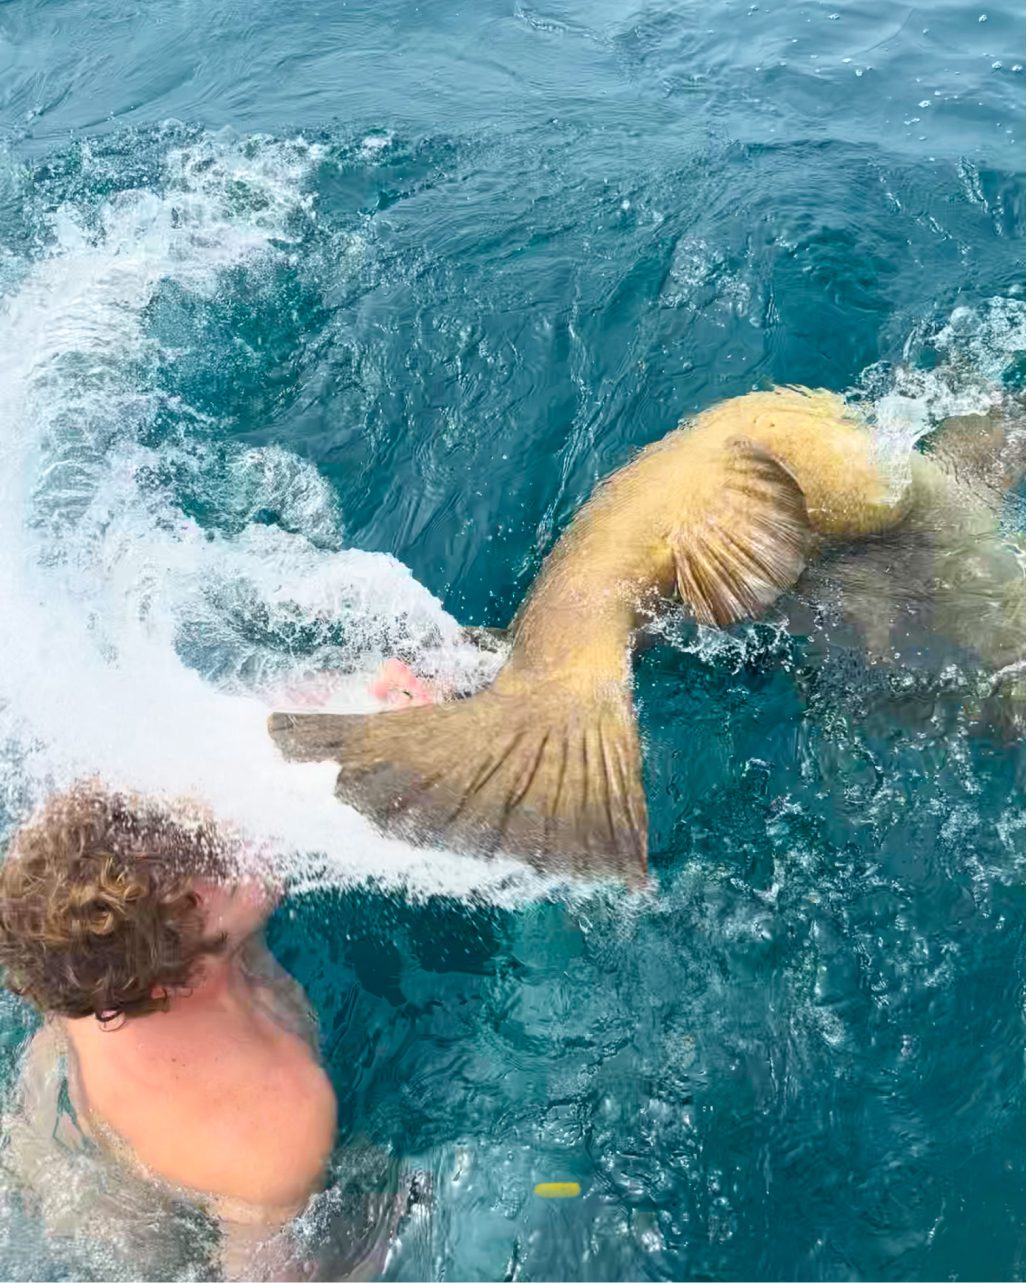 Atlantic Goliath Grouper splashing water at a person's face.